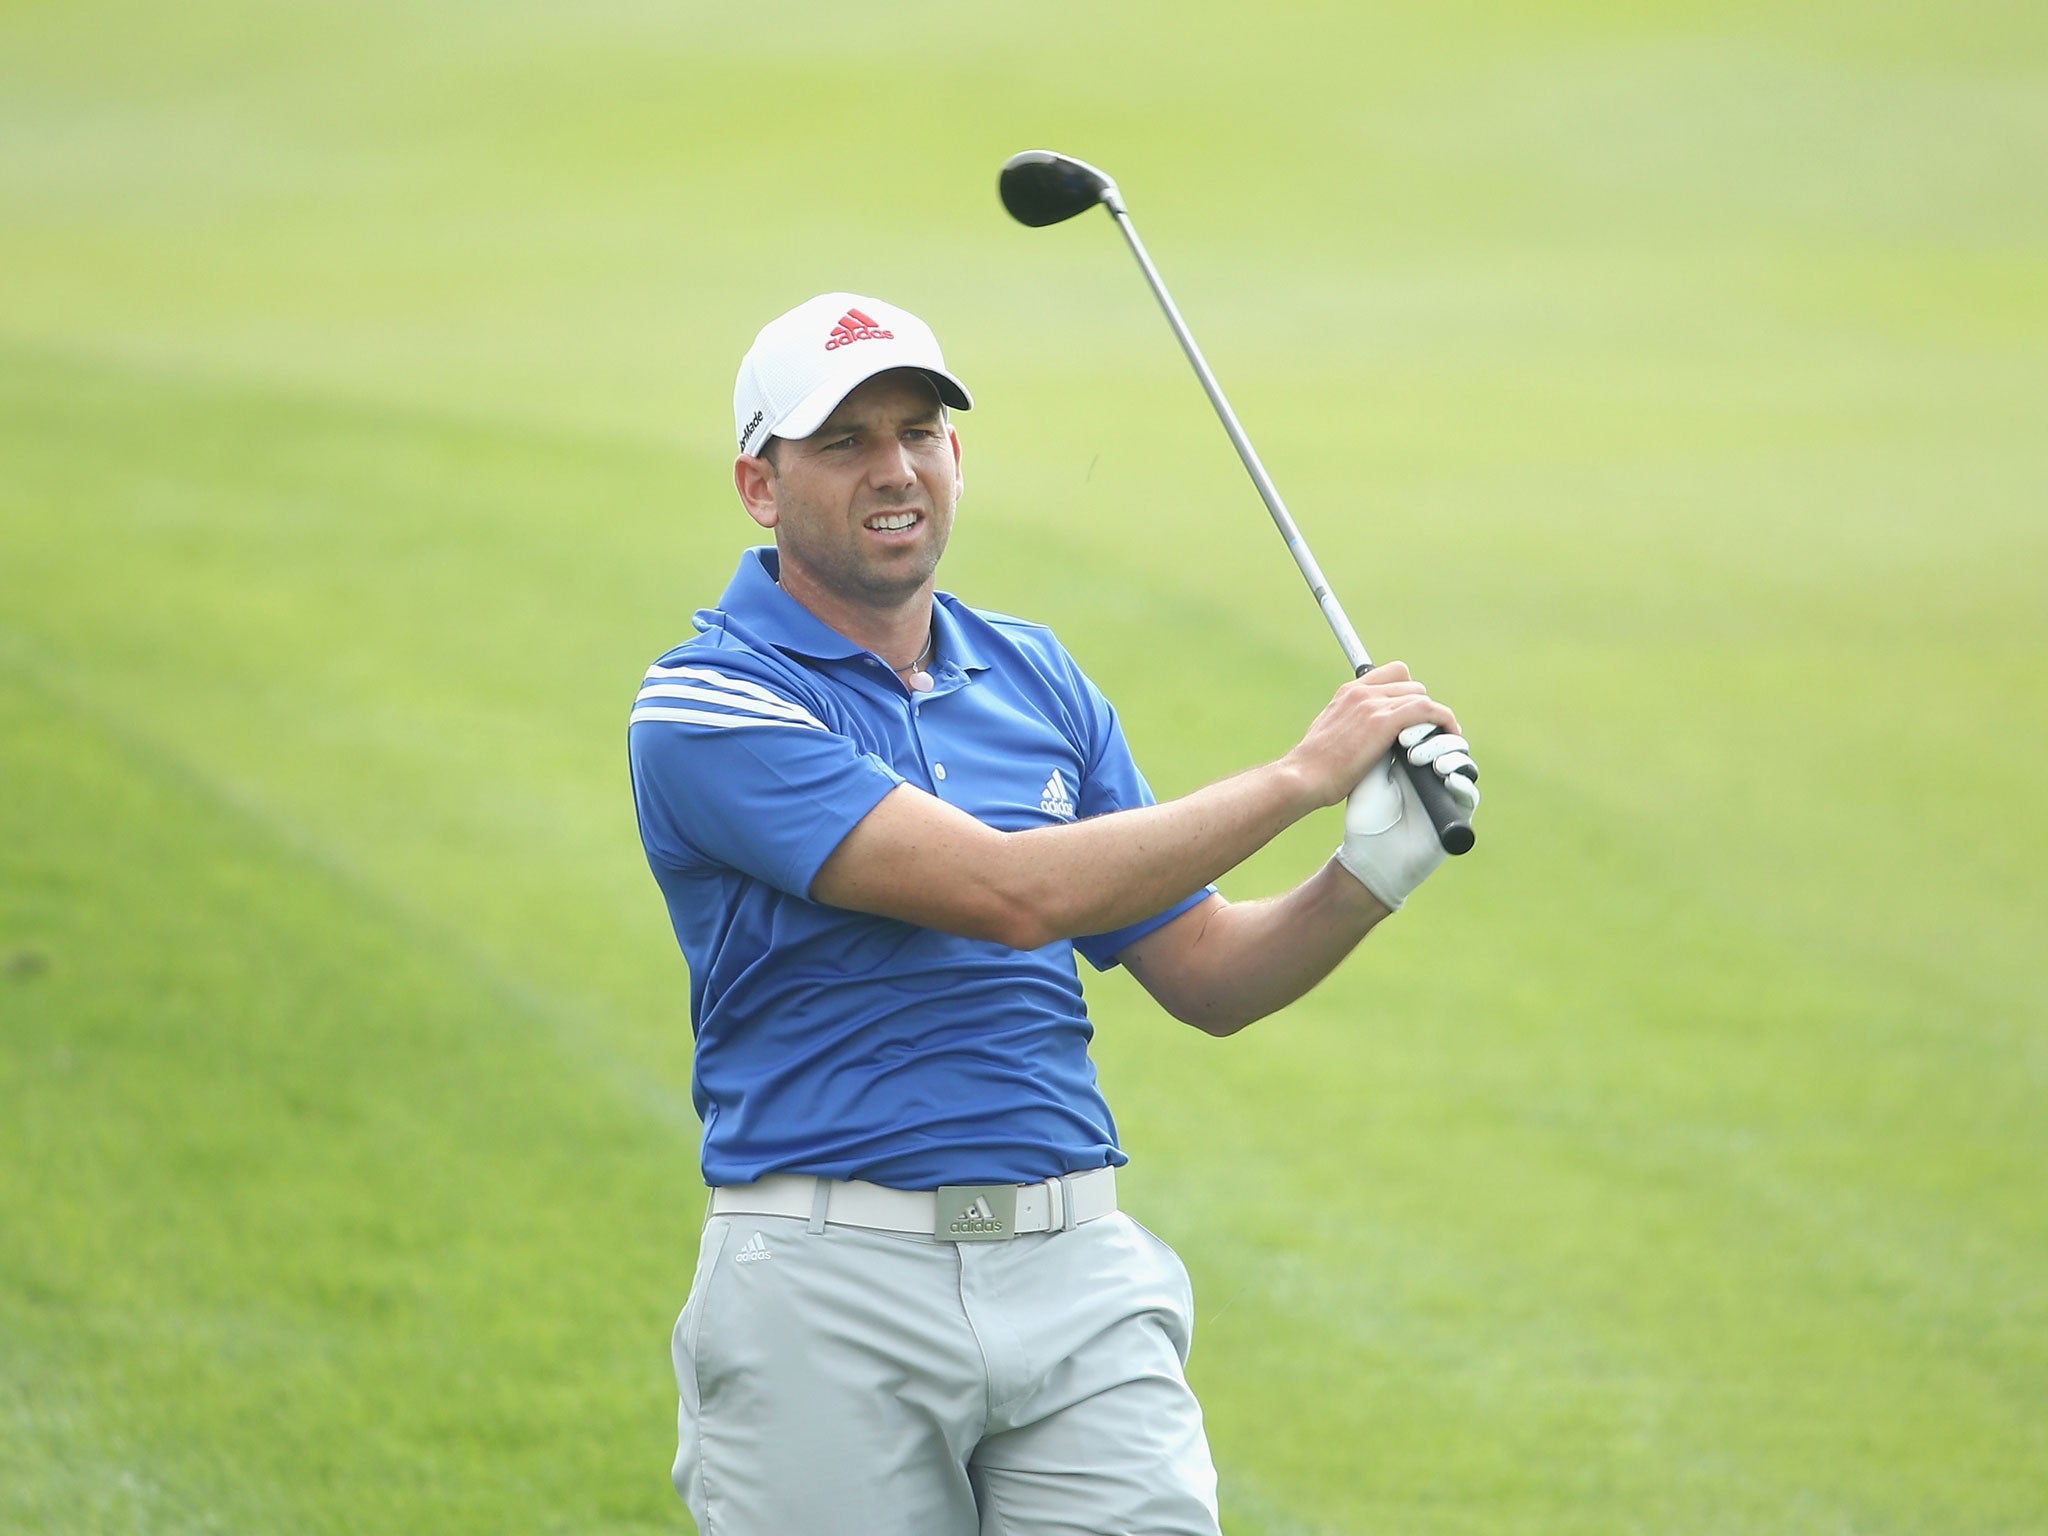 Sergio Garcia escaped disciplinary action after he was seen tapping down a repaired pitch mark